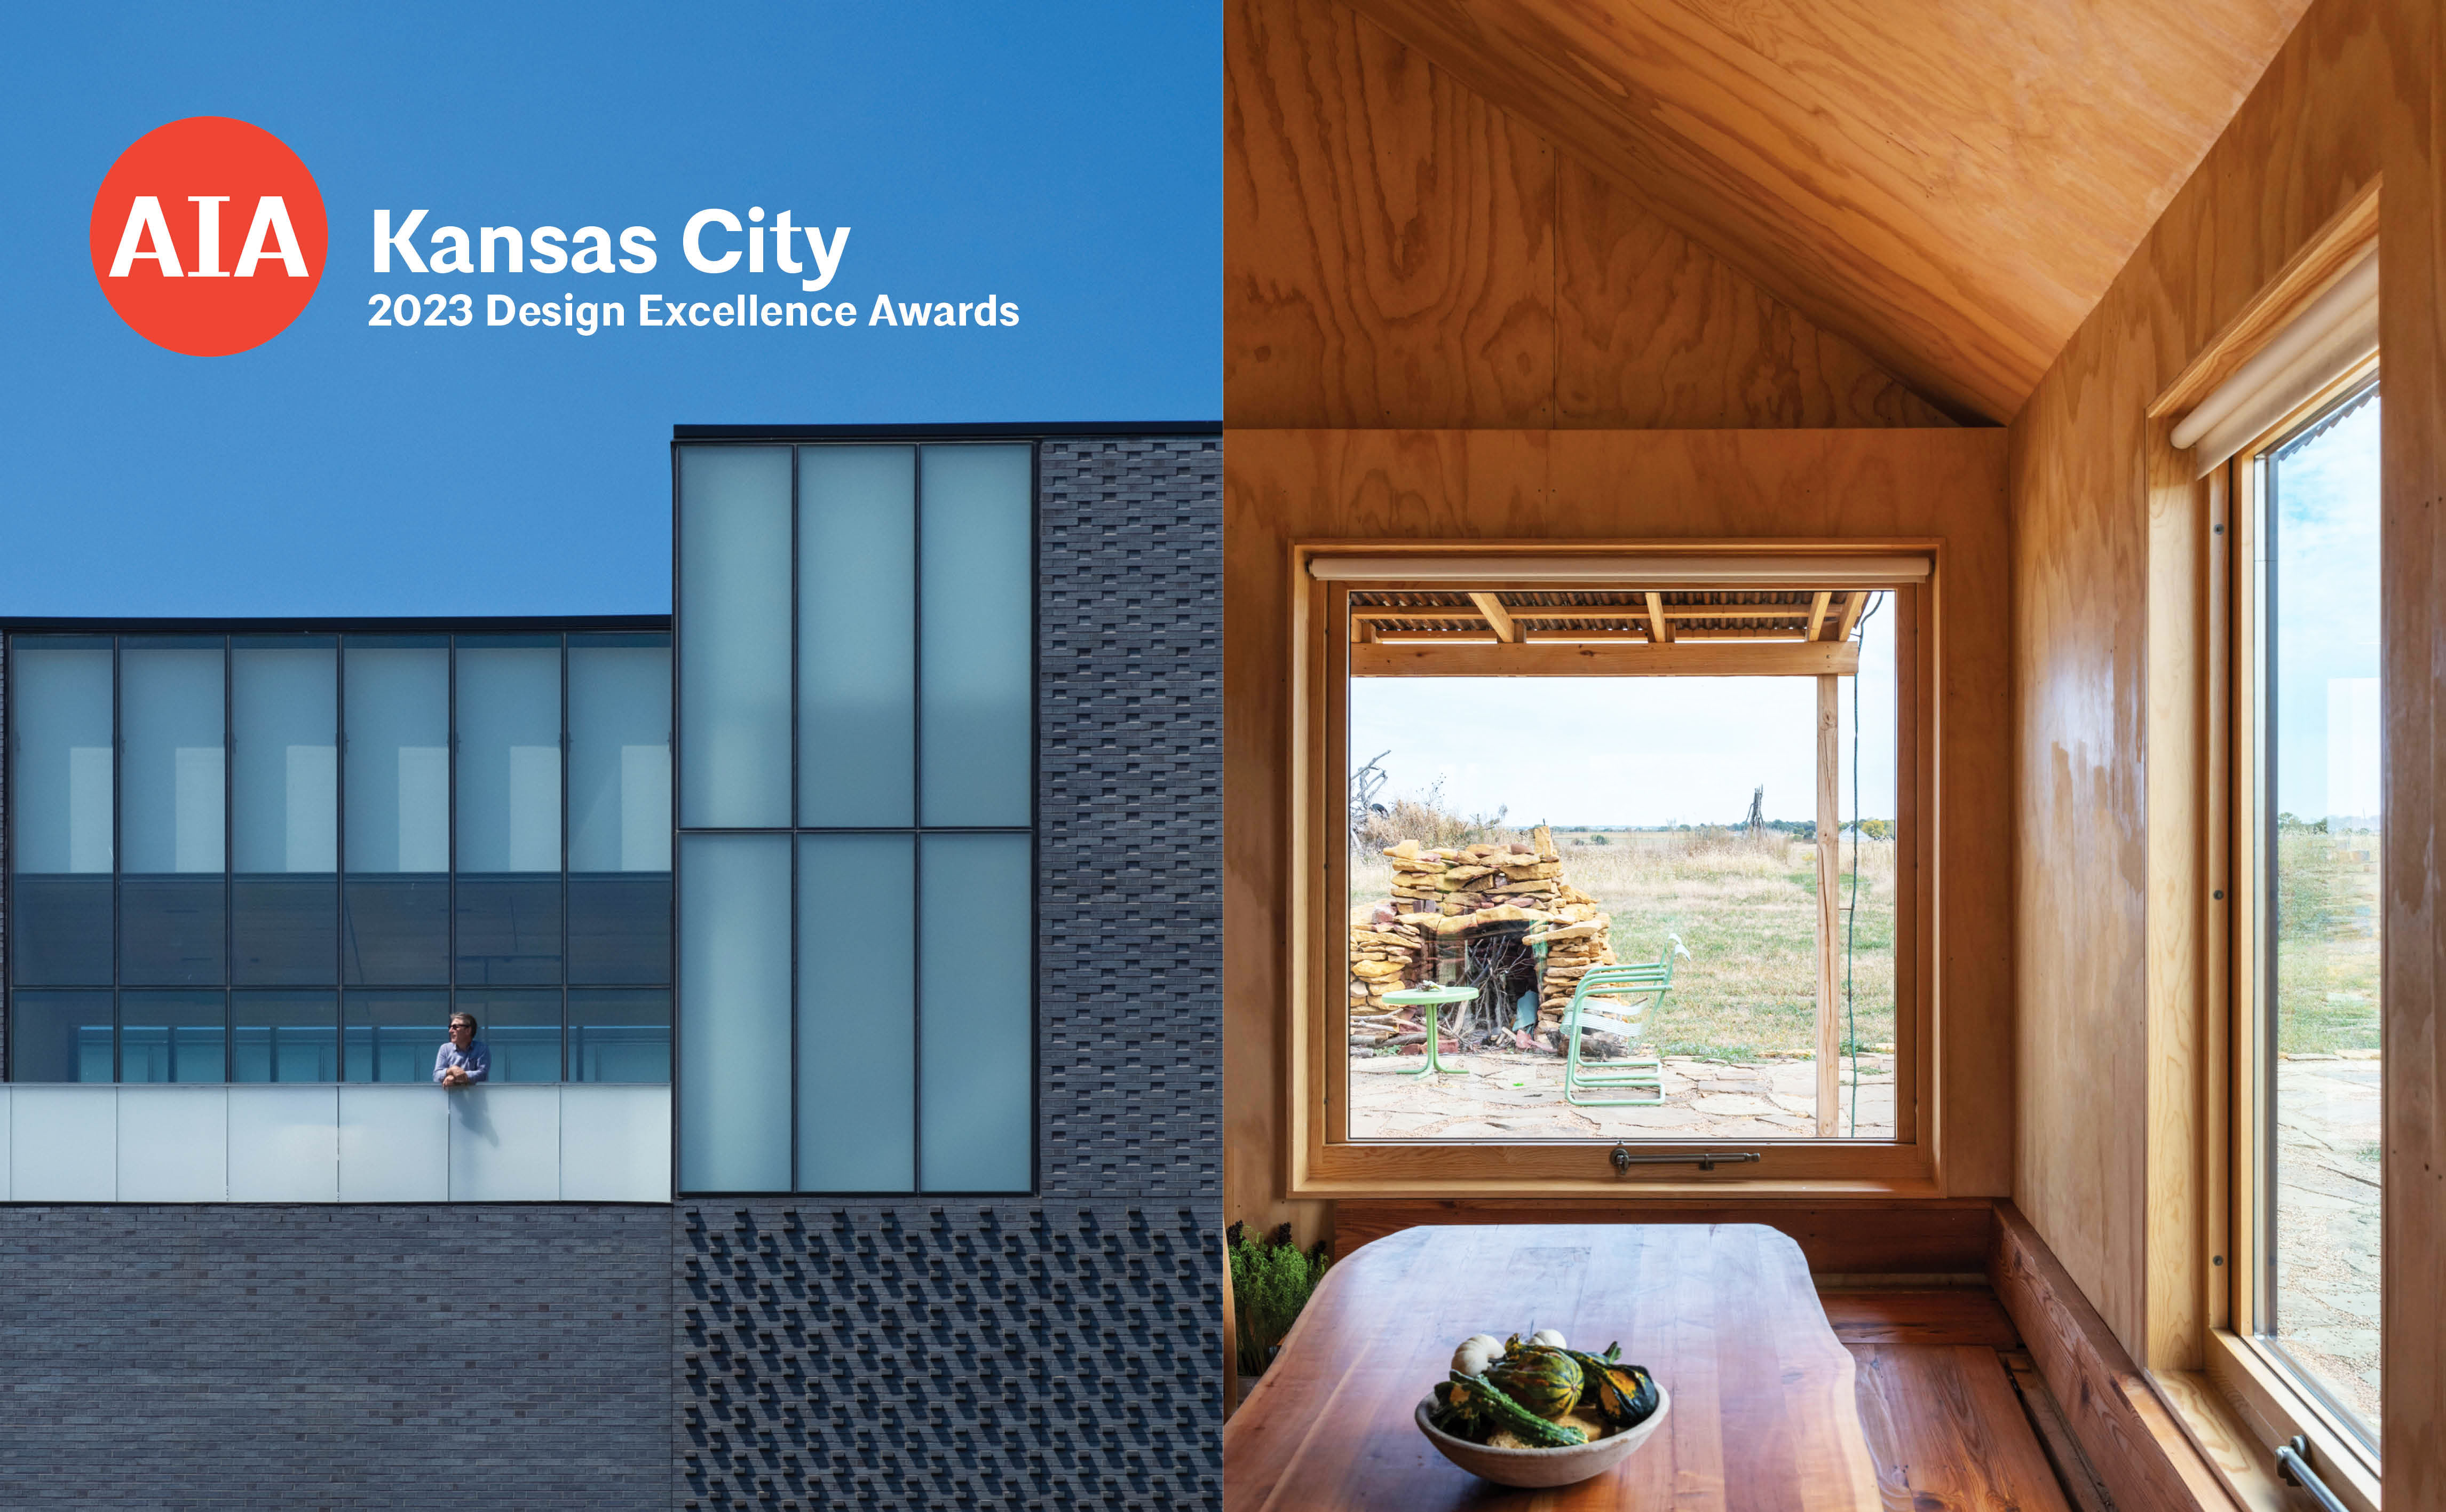 Three BNIM Projects Receive 2023 AIA Kansas City Honor Awards, including Project of the Year